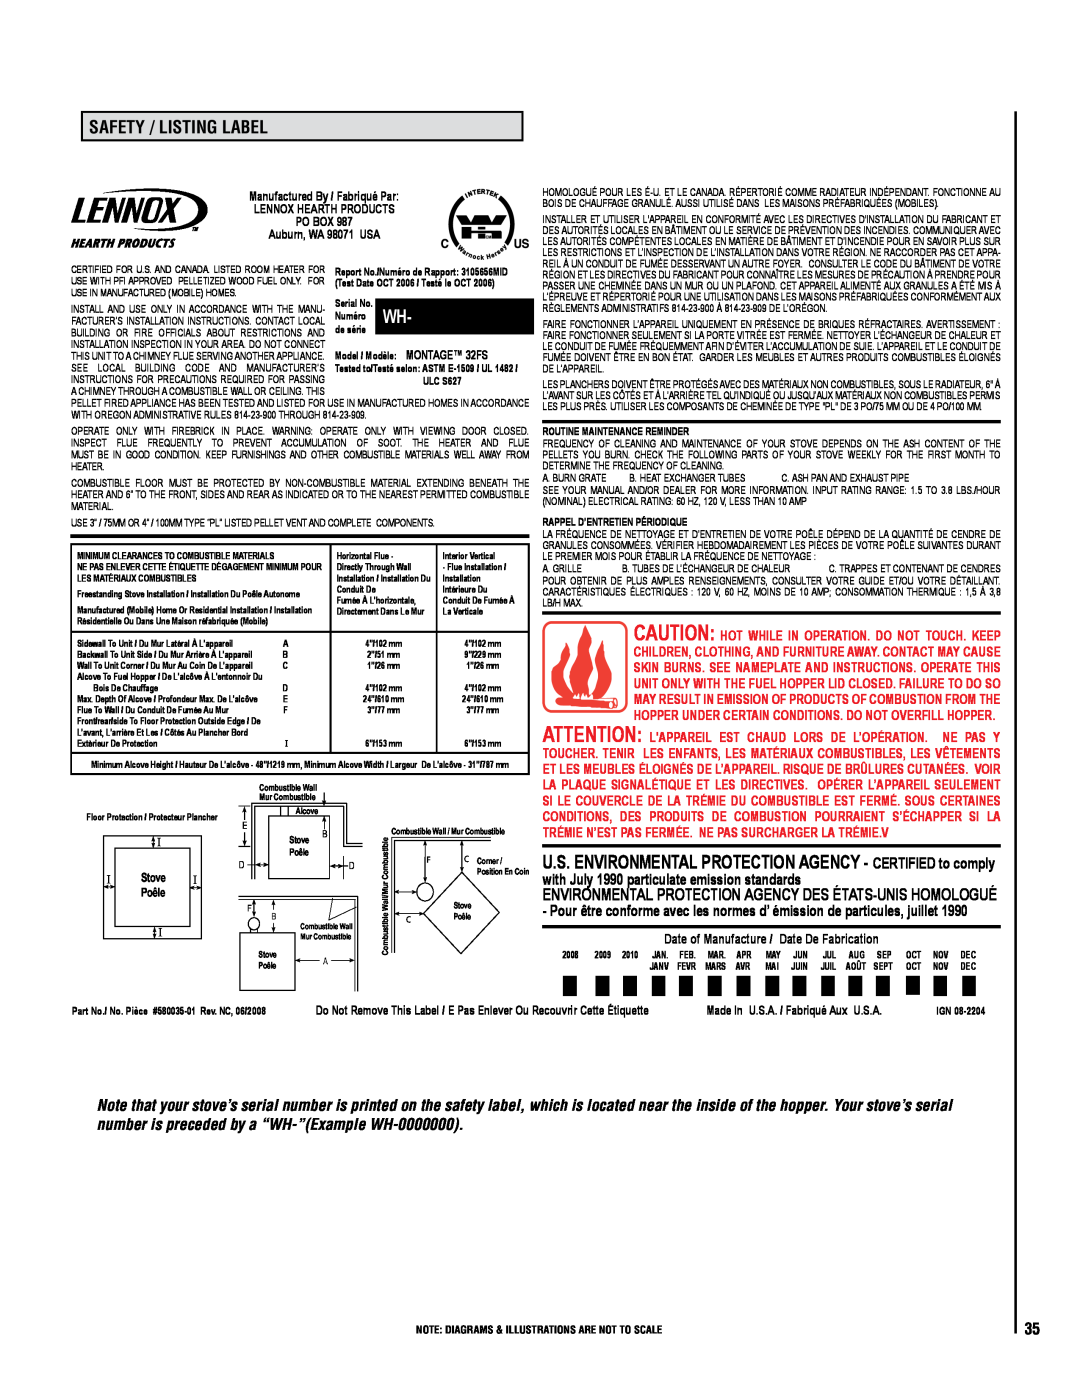 Lennox Hearth 32FS operation manual safety / listing label, Manufactured By / Fabriqué Par, Lennox Hearth Products Po Box 